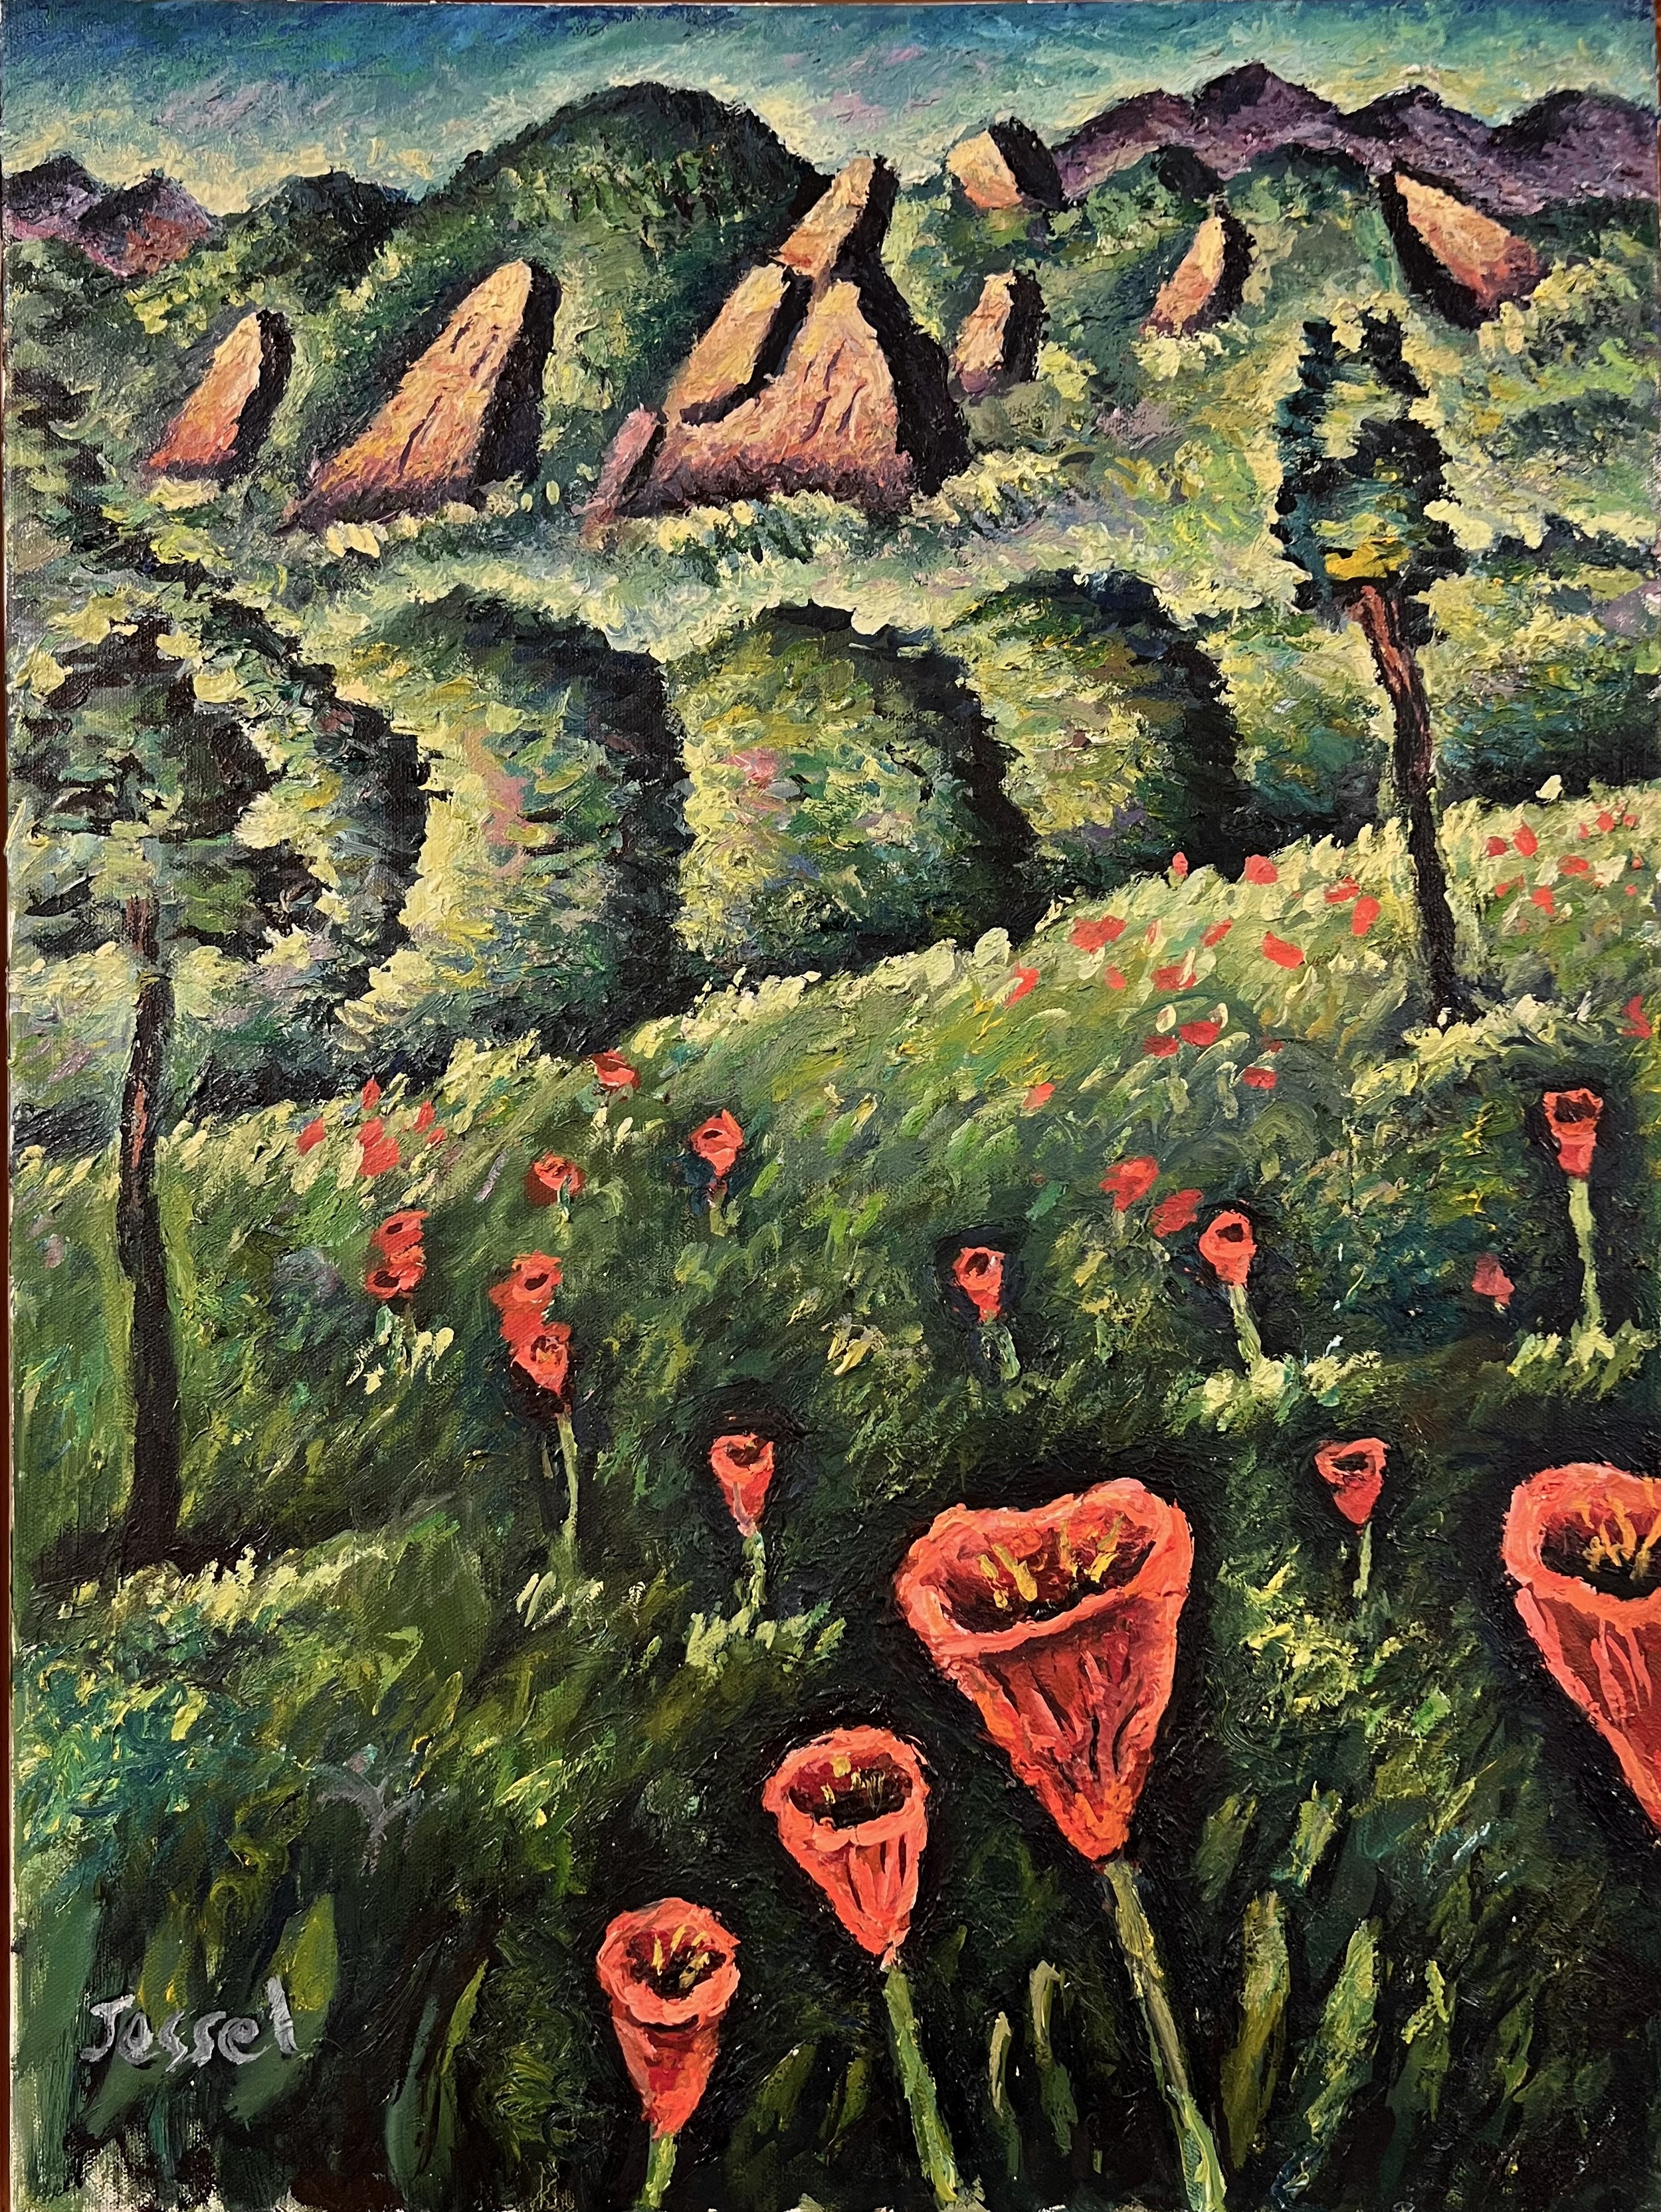  “POPPIES”, 2013, OIL ON CANVAS, 24”/18” 